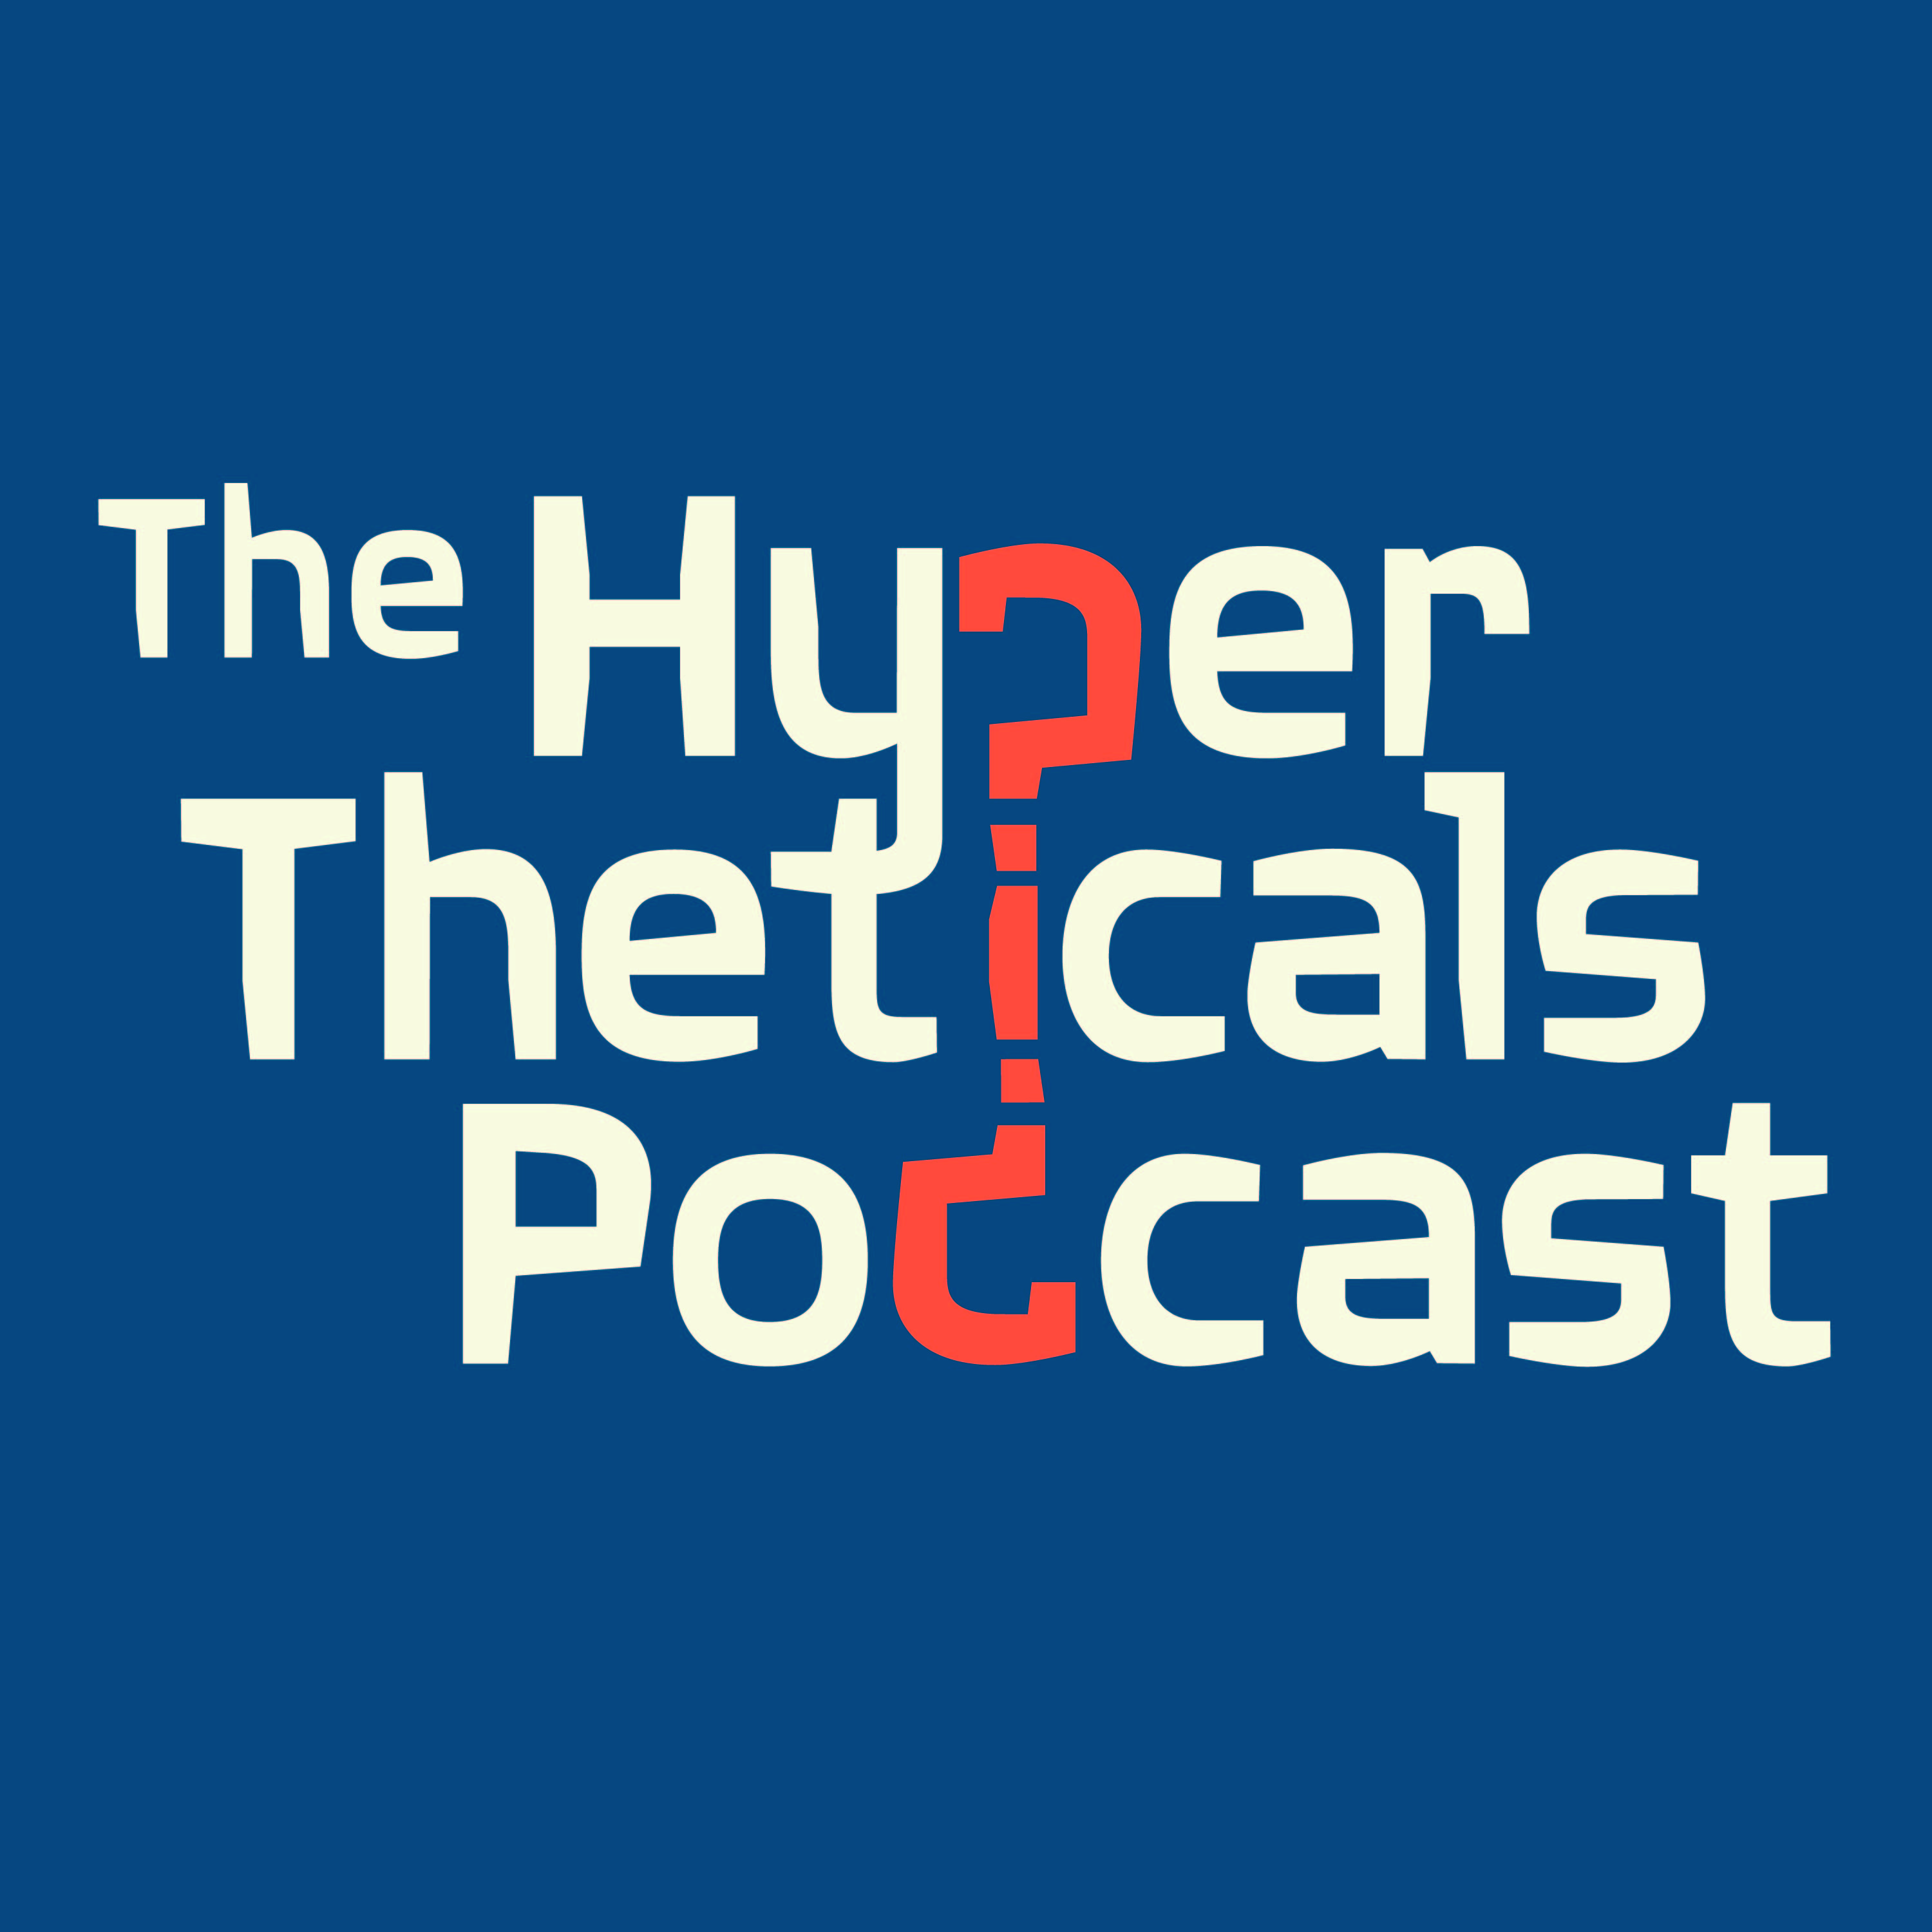 The Hyper Theticals Podcast